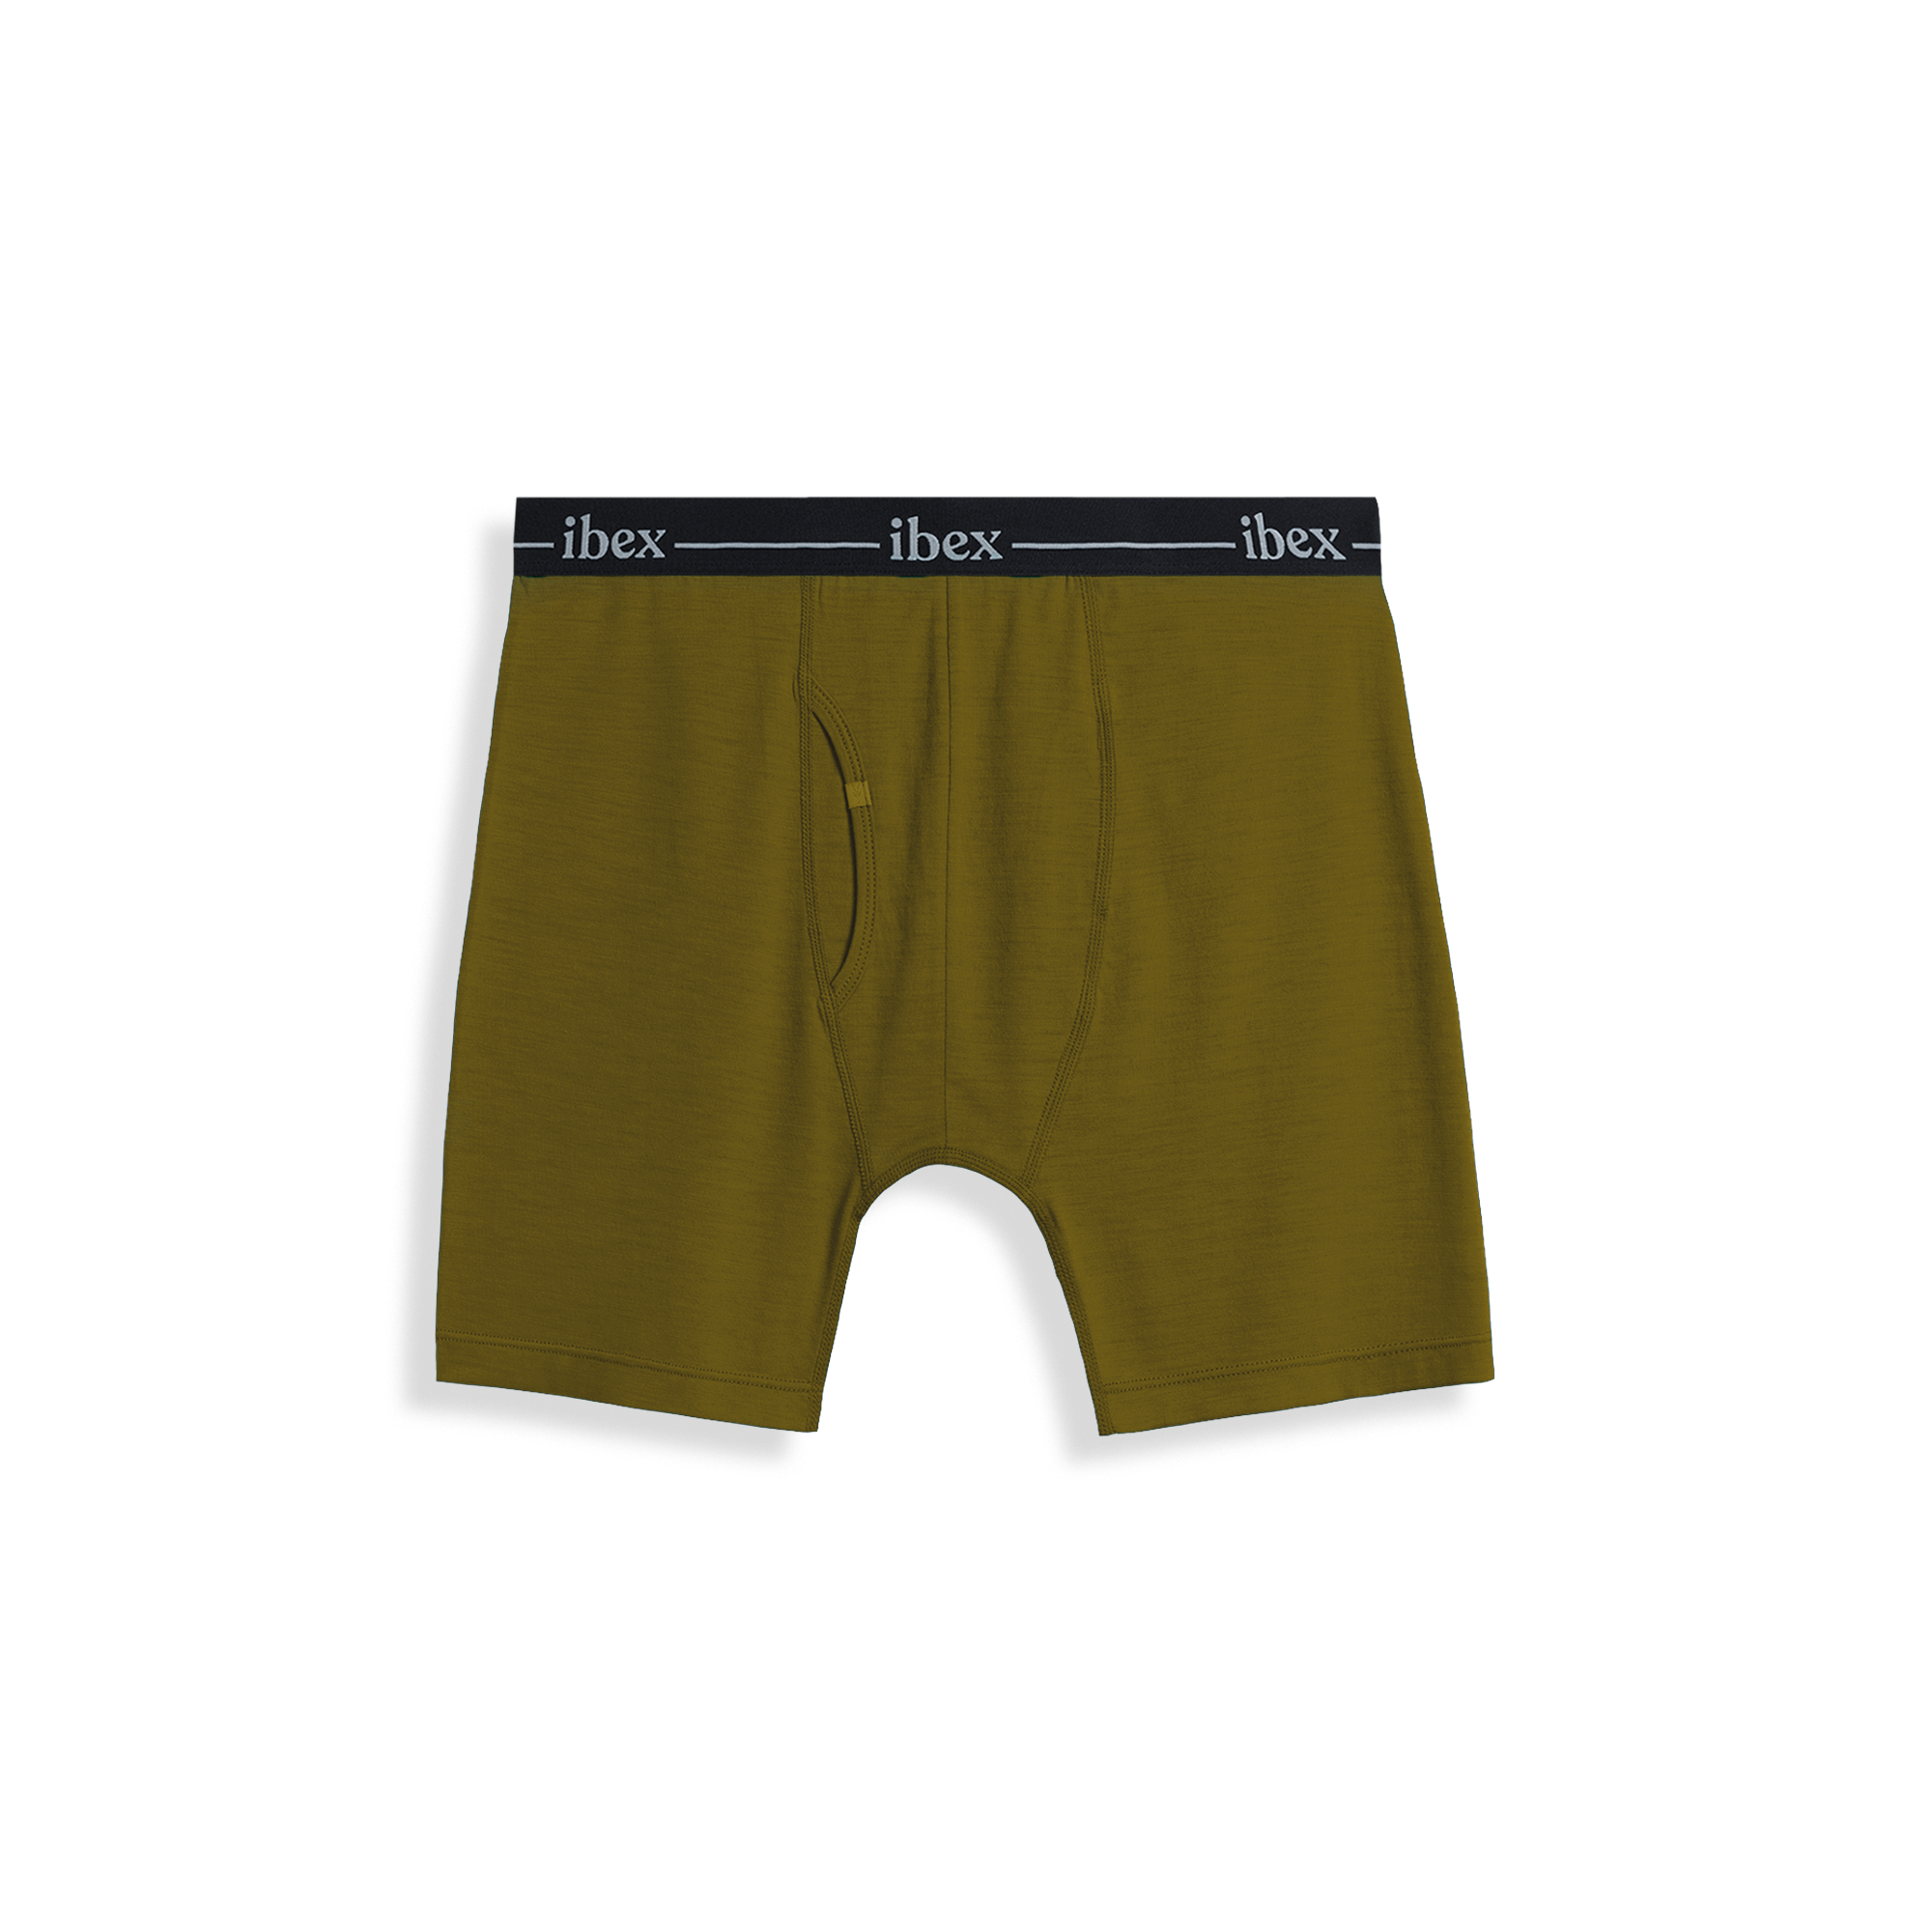 No Wash Underwear: Boxer Shorts Are Yellow in Front, Brown in the Back